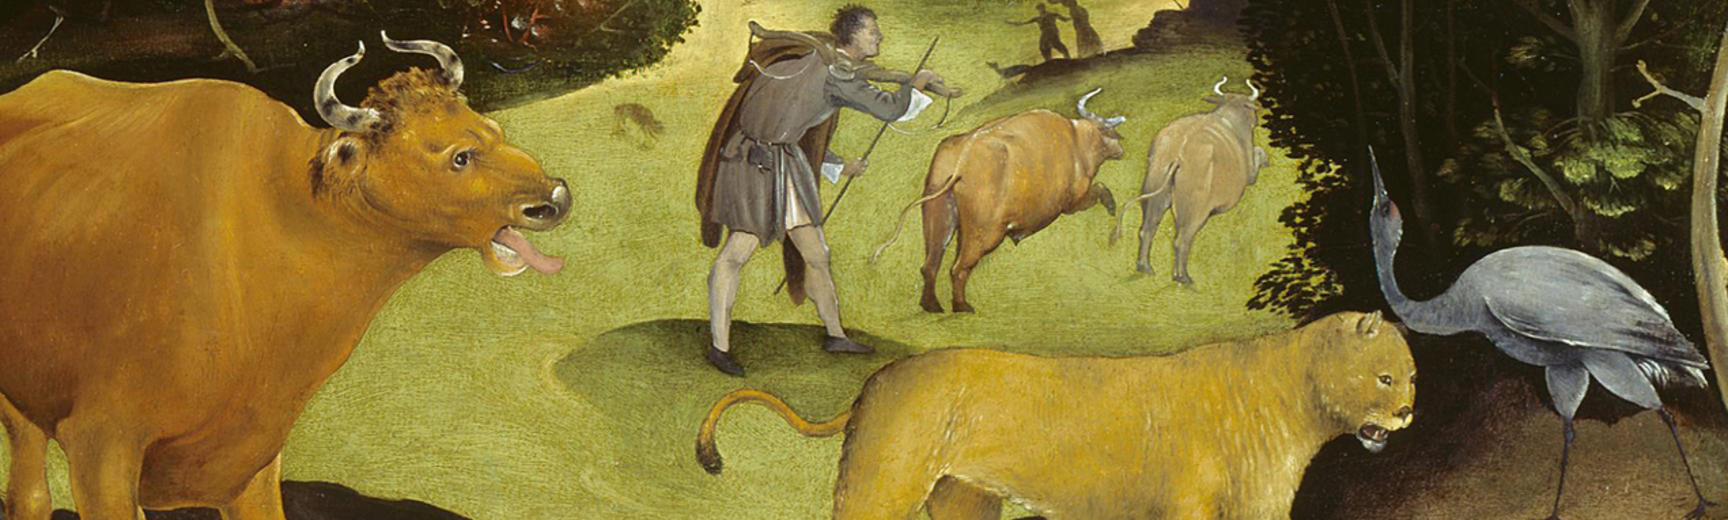 The Forest Fire (detail) by Piero di Cosimo